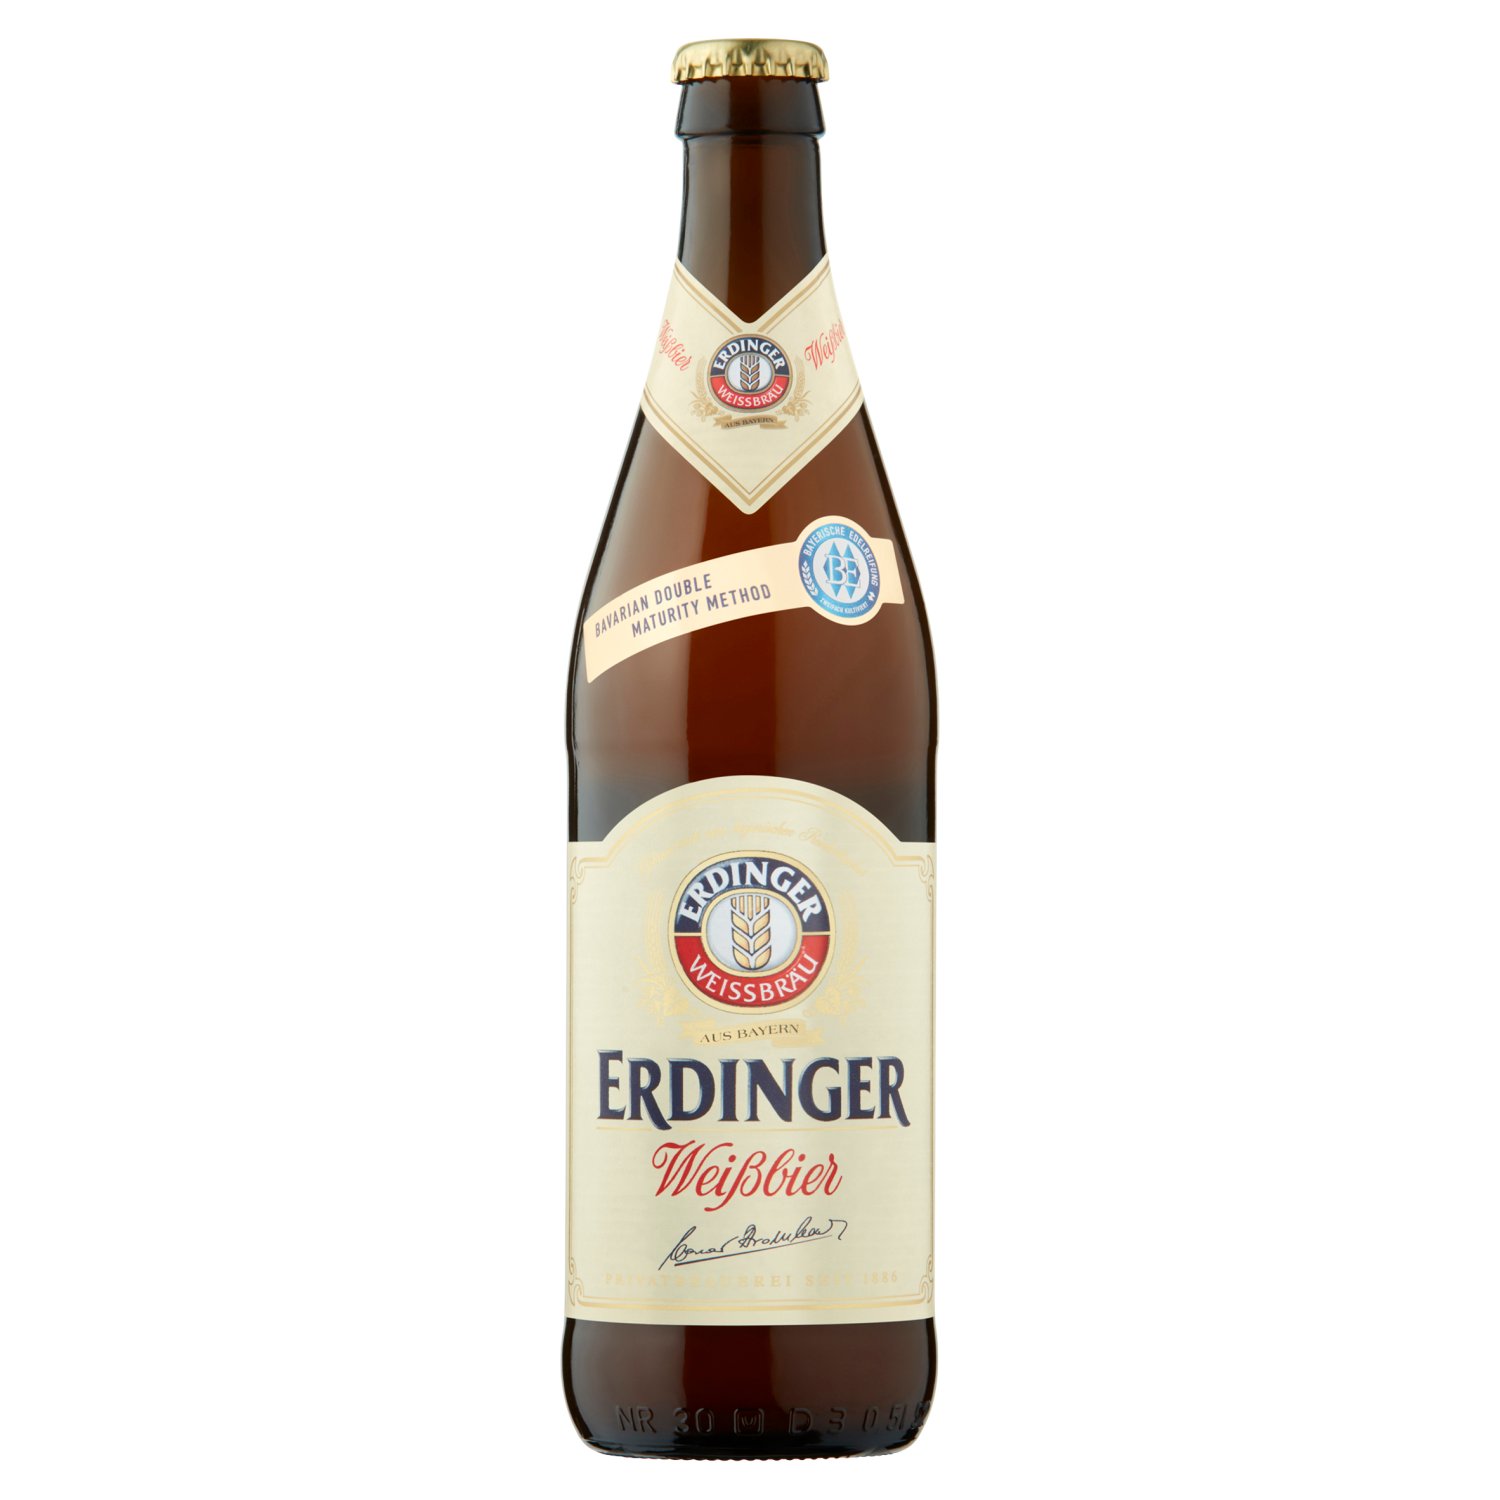 The original since 1886. 

Erdinger Weissbier Classic wheat beer blends gently spicy malt aromas with mildly bitter hops. Its secret lies in our unique Erdinger brewing yeasts. They provide the fruity notes and unmistakably fresh flavour. The finishing touch for every Erdinger Weissbier is a further specialty: the “Bayerische Edelreifung” or double maturity method. After the main fermentation process, we give our beer the time it needs to mature a second time in the bottle. And we are happy to give it this time. Because this allows its delicious lively nature and the harmonious interplay of its various aromas to fully unfold. 

Erdinger Weissbier with fine yeast, the crowning glory of traditional Bavarian brewing skills. With its elegant flavour, this wheat beer is like no other. Every sip leaves you wanting more.